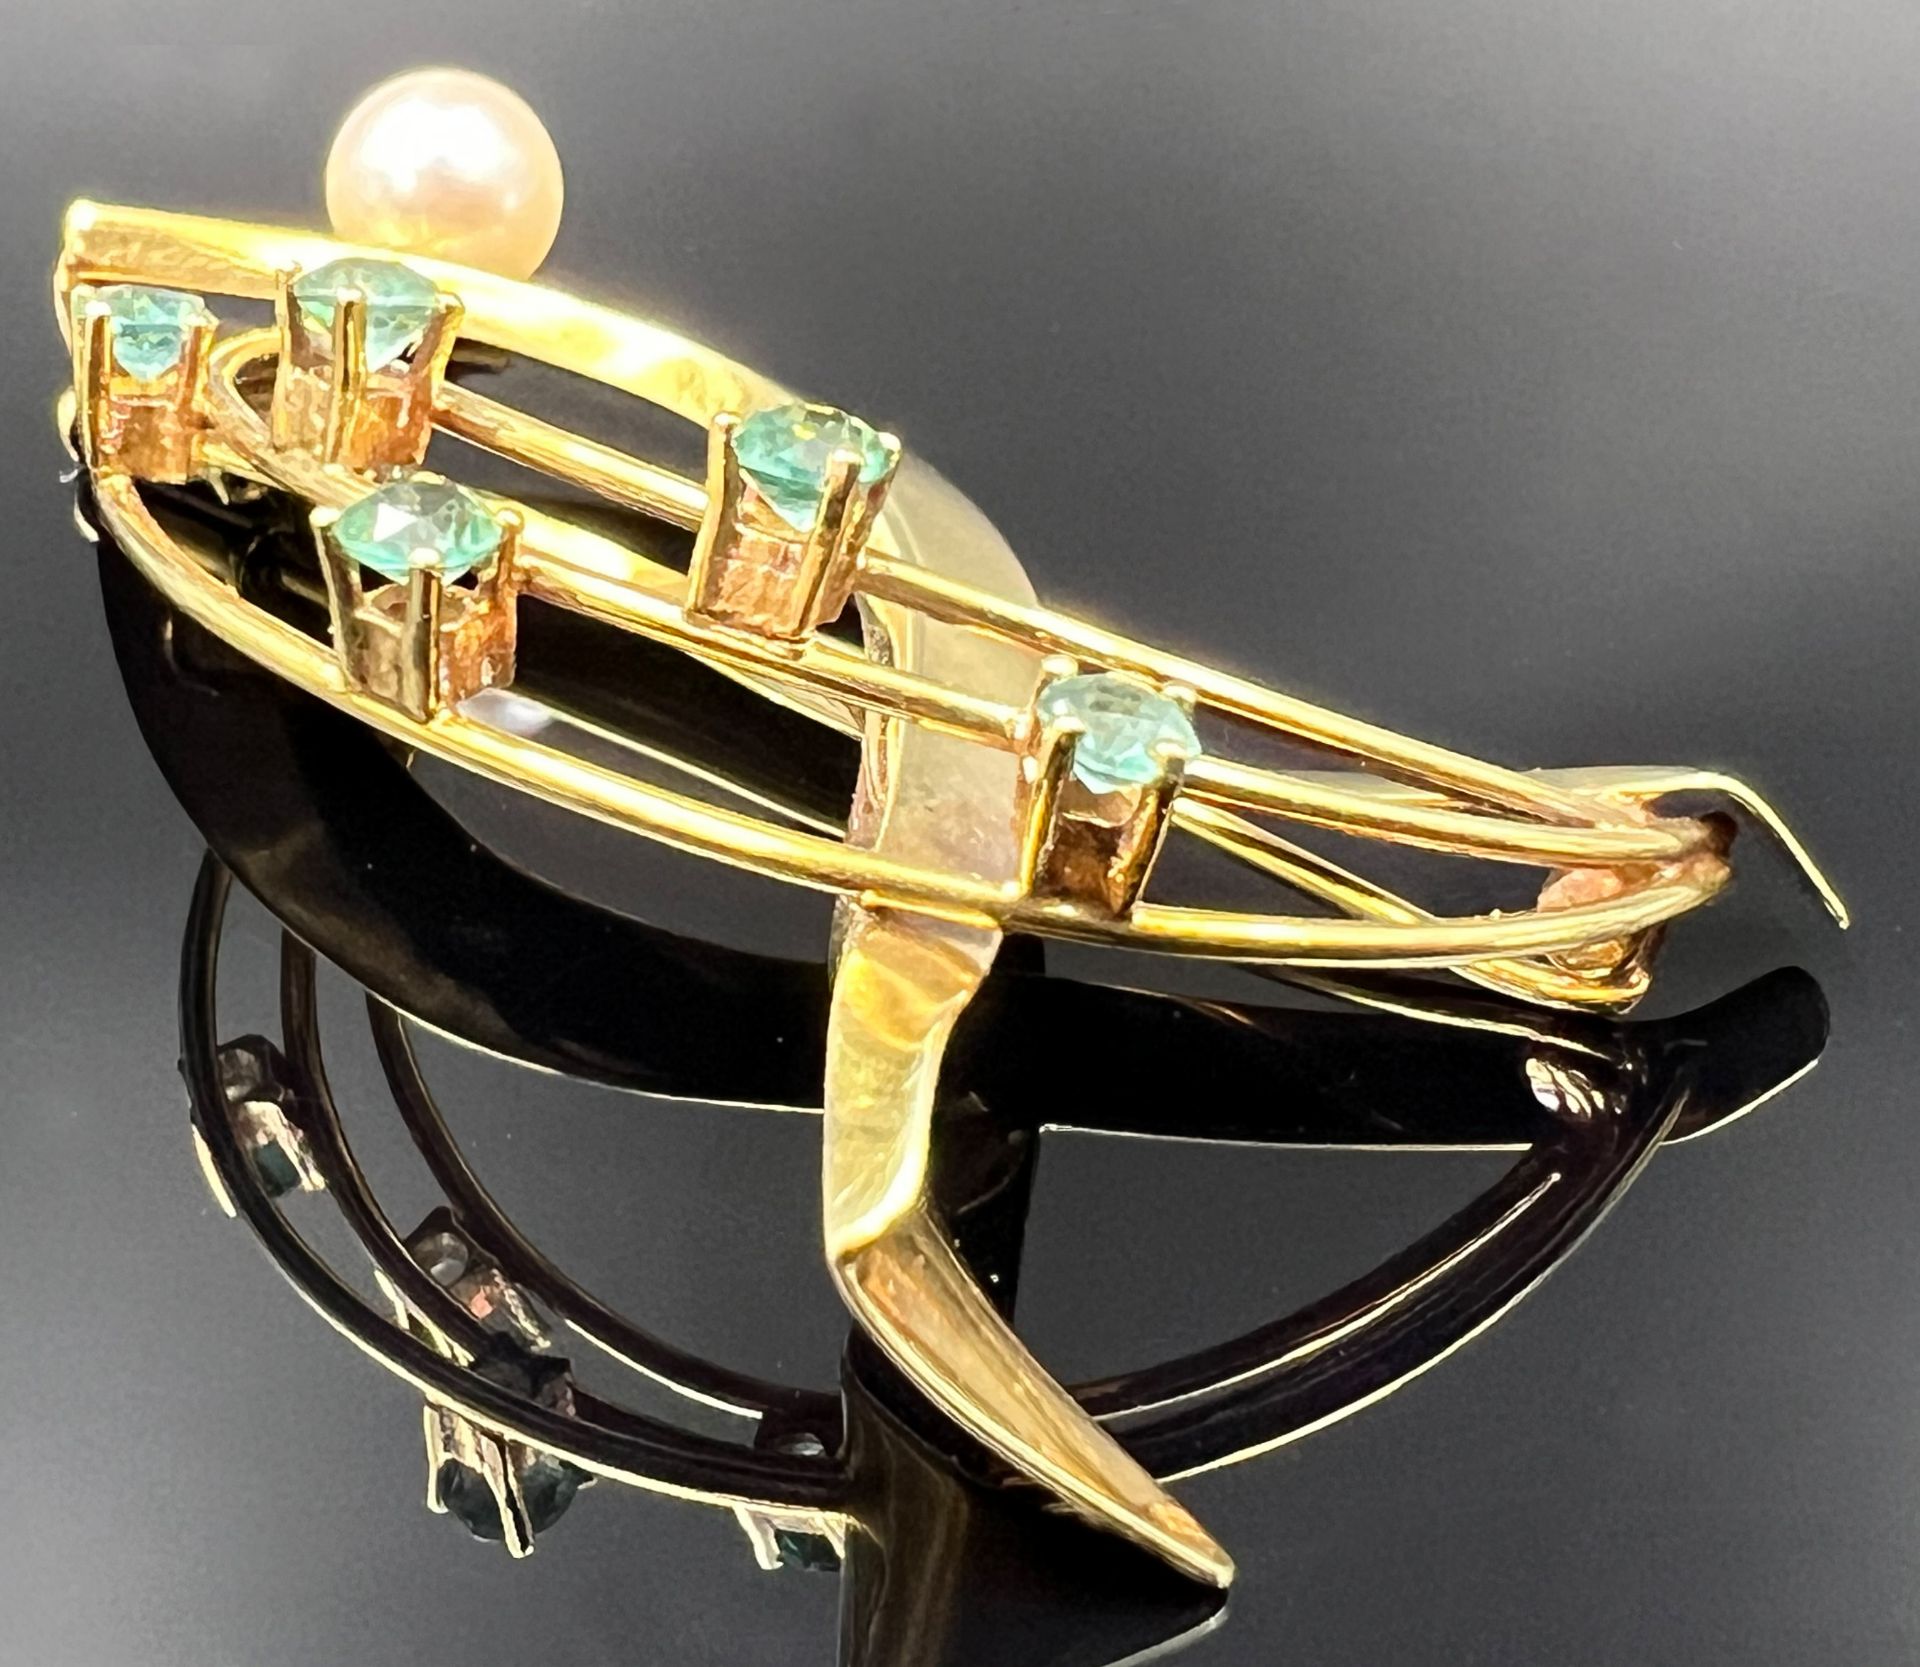 Brooch. 585 yellow gold with a pearl and light green coloured stones. - Image 2 of 6